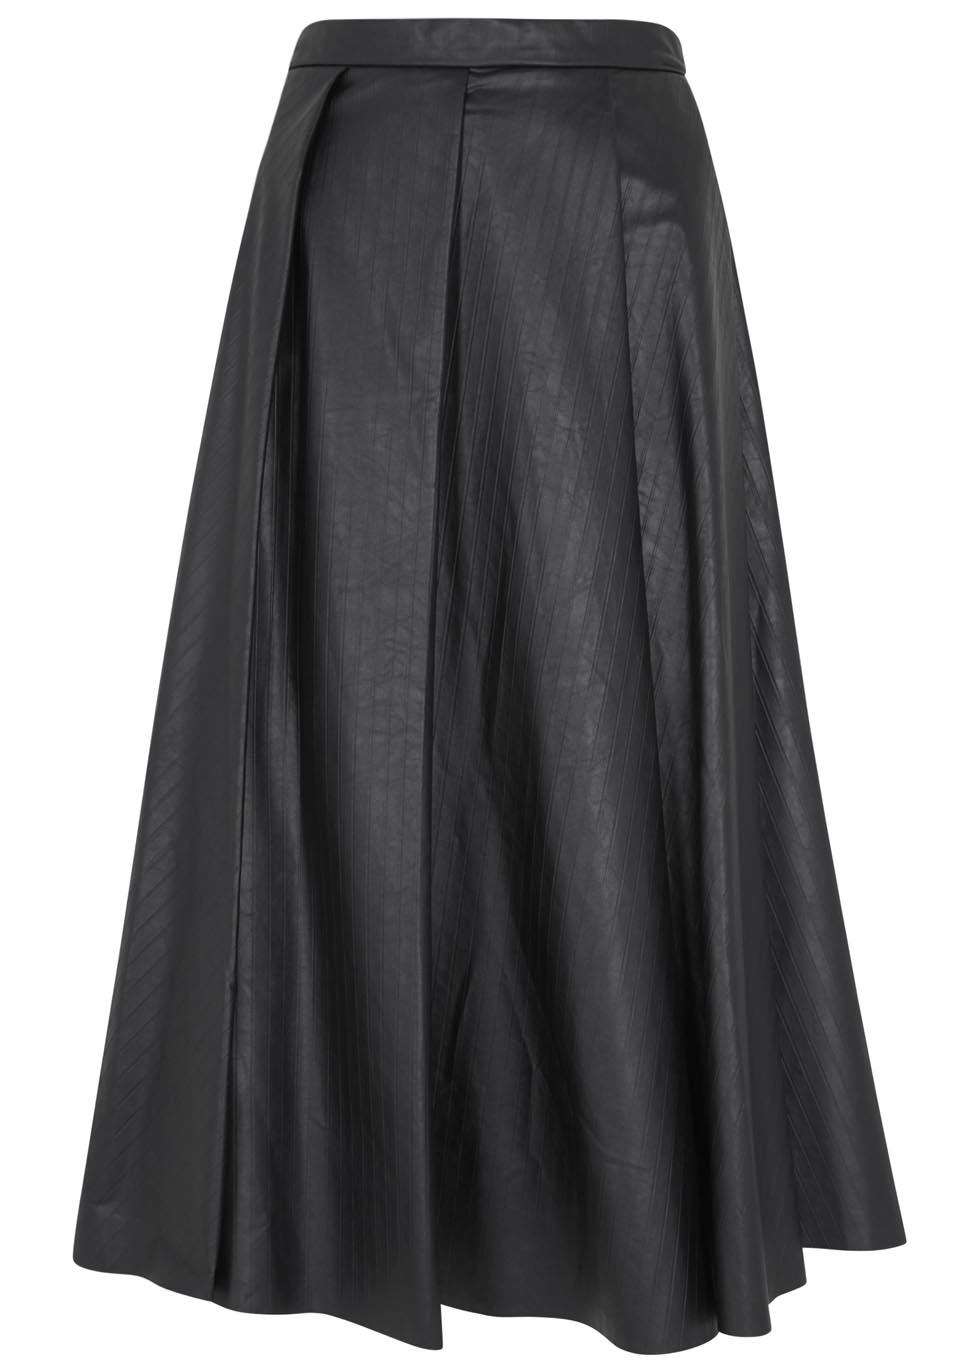 Black pleated faux leather skirt